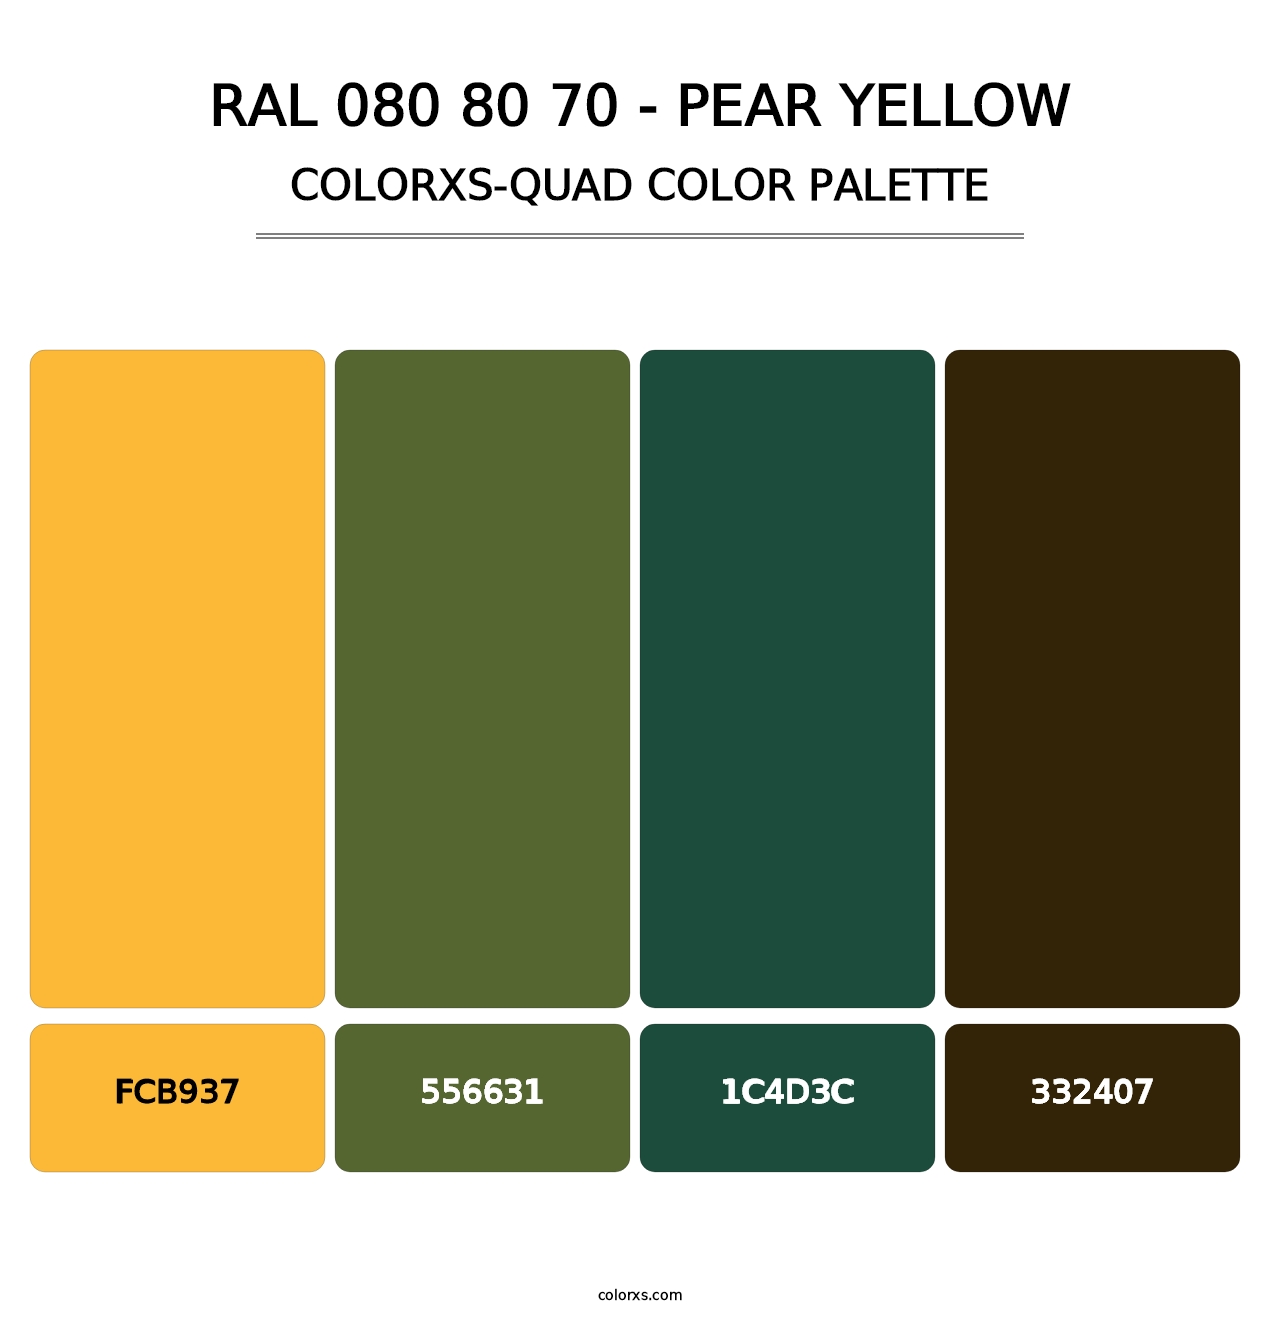 RAL 080 80 70 - Pear Yellow - Colorxs Quad Palette